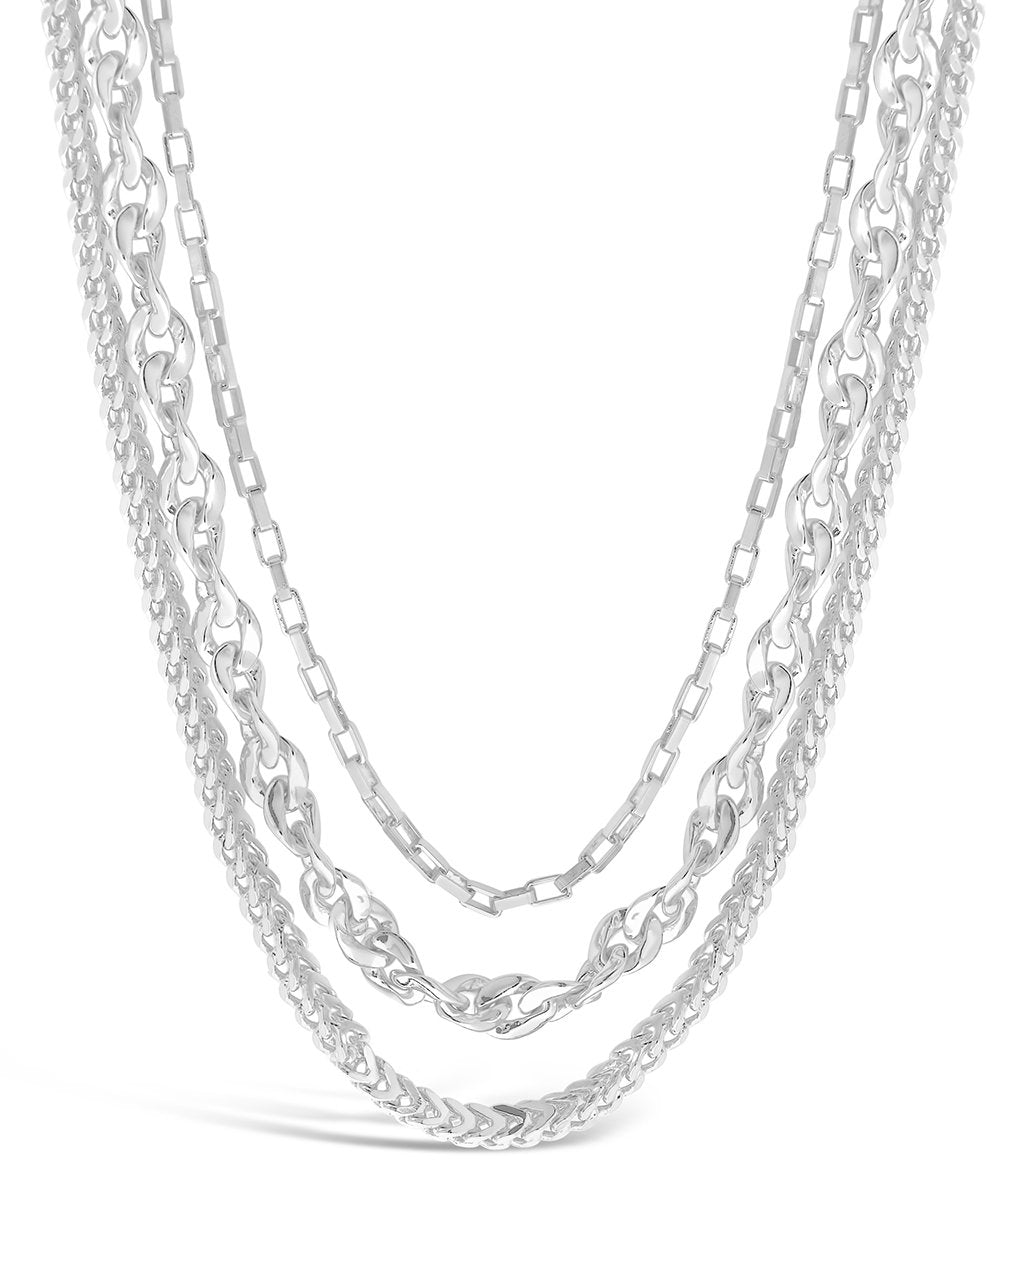 Necklace Layering Silver Necklaces Rope Chain Necklace and Love